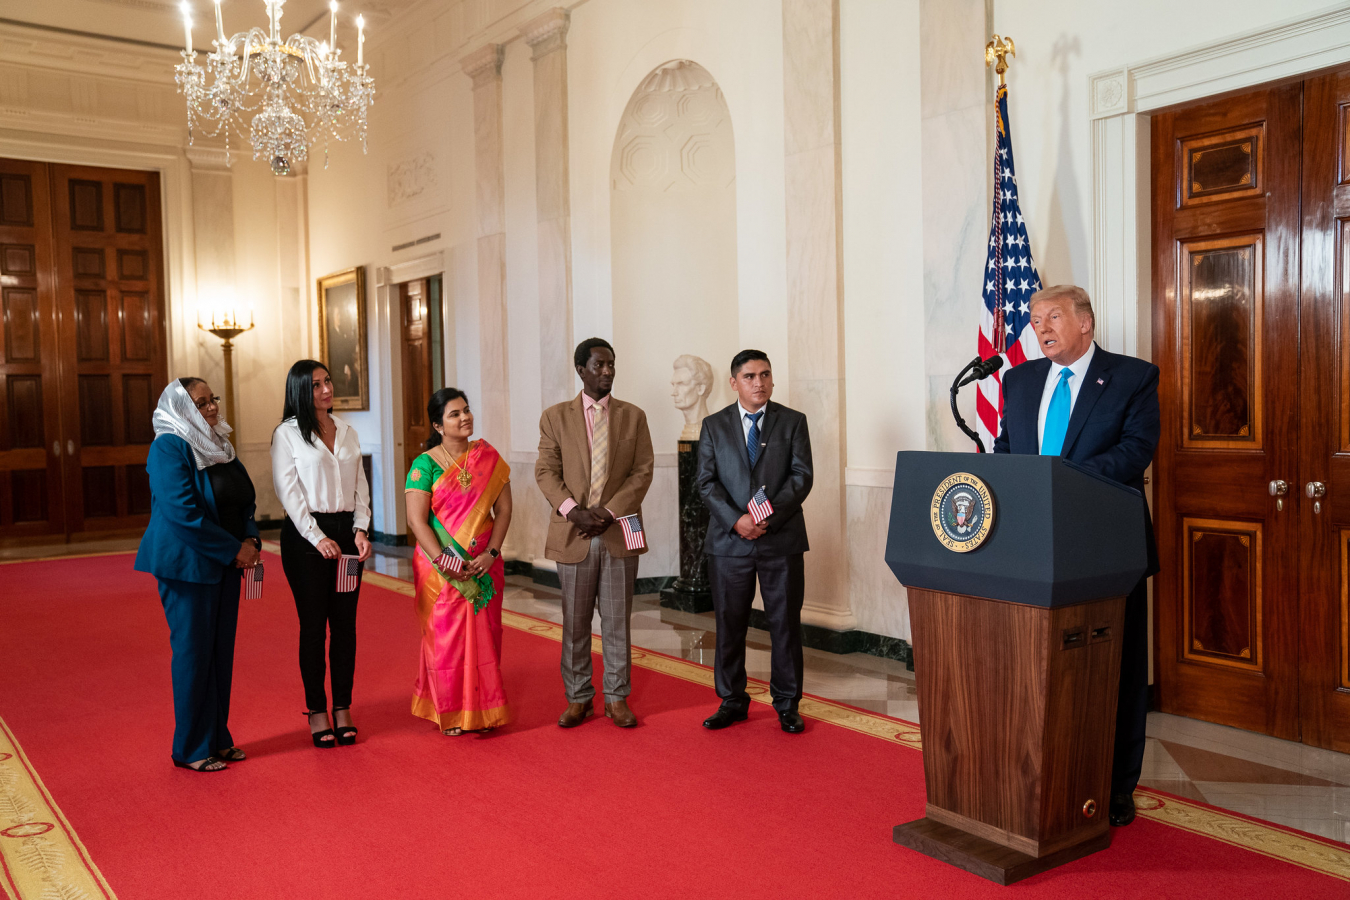 President Trump Participates in a Naturalization Ceremony 25 August 2020